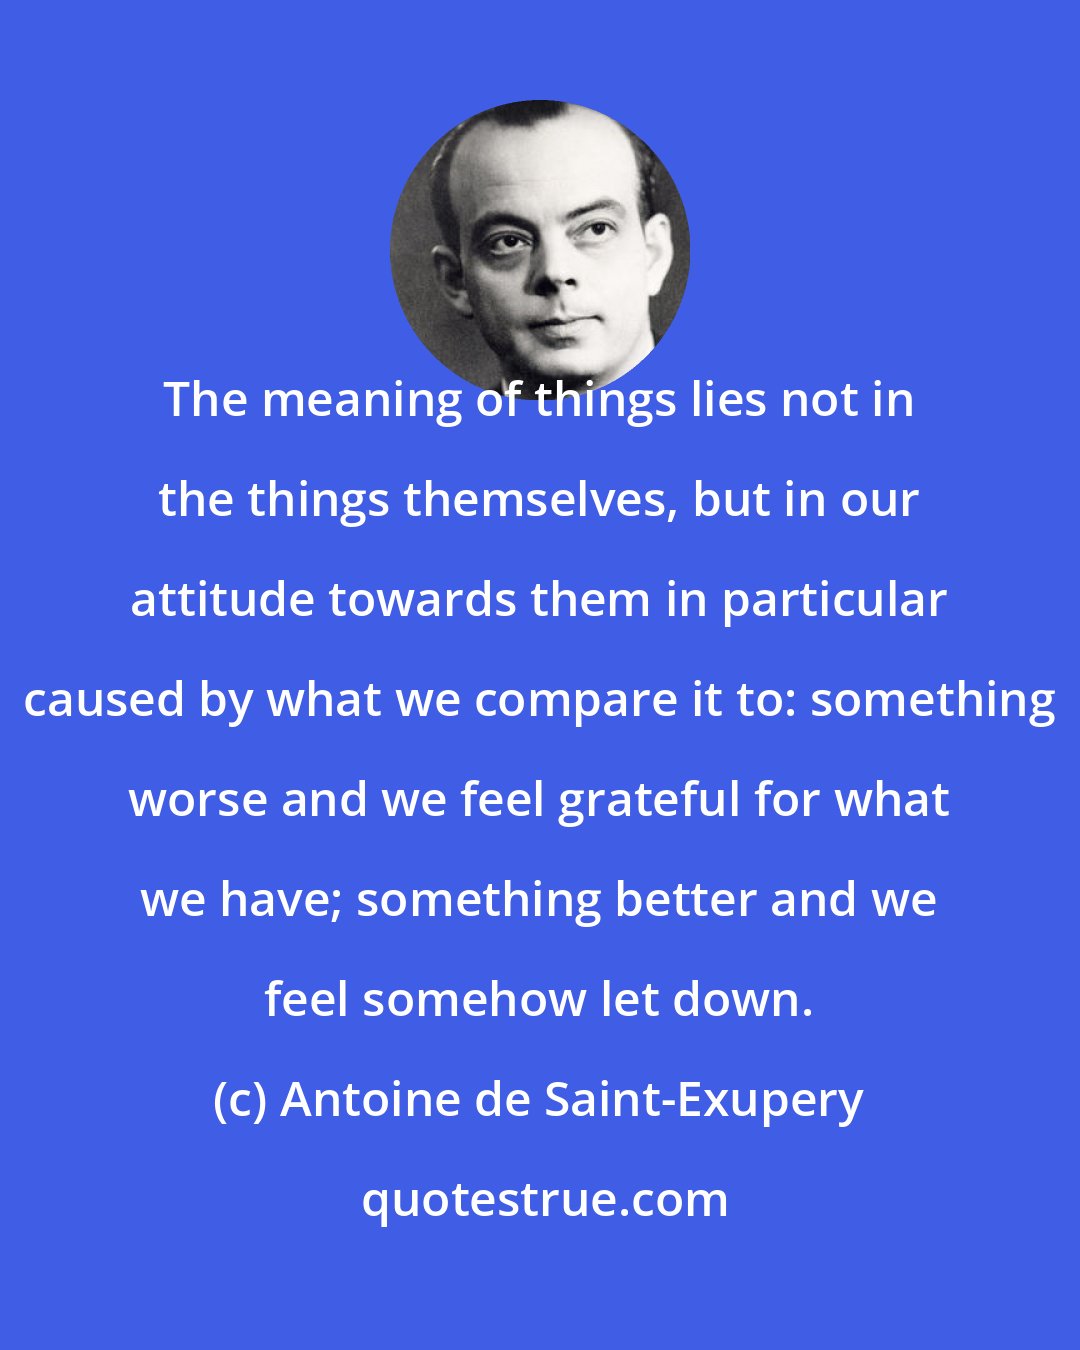 Antoine de Saint-Exupery: The meaning of things lies not in the things themselves, but in our attitude towards them in particular caused by what we compare it to: something worse and we feel grateful for what we have; something better and we feel somehow let down.